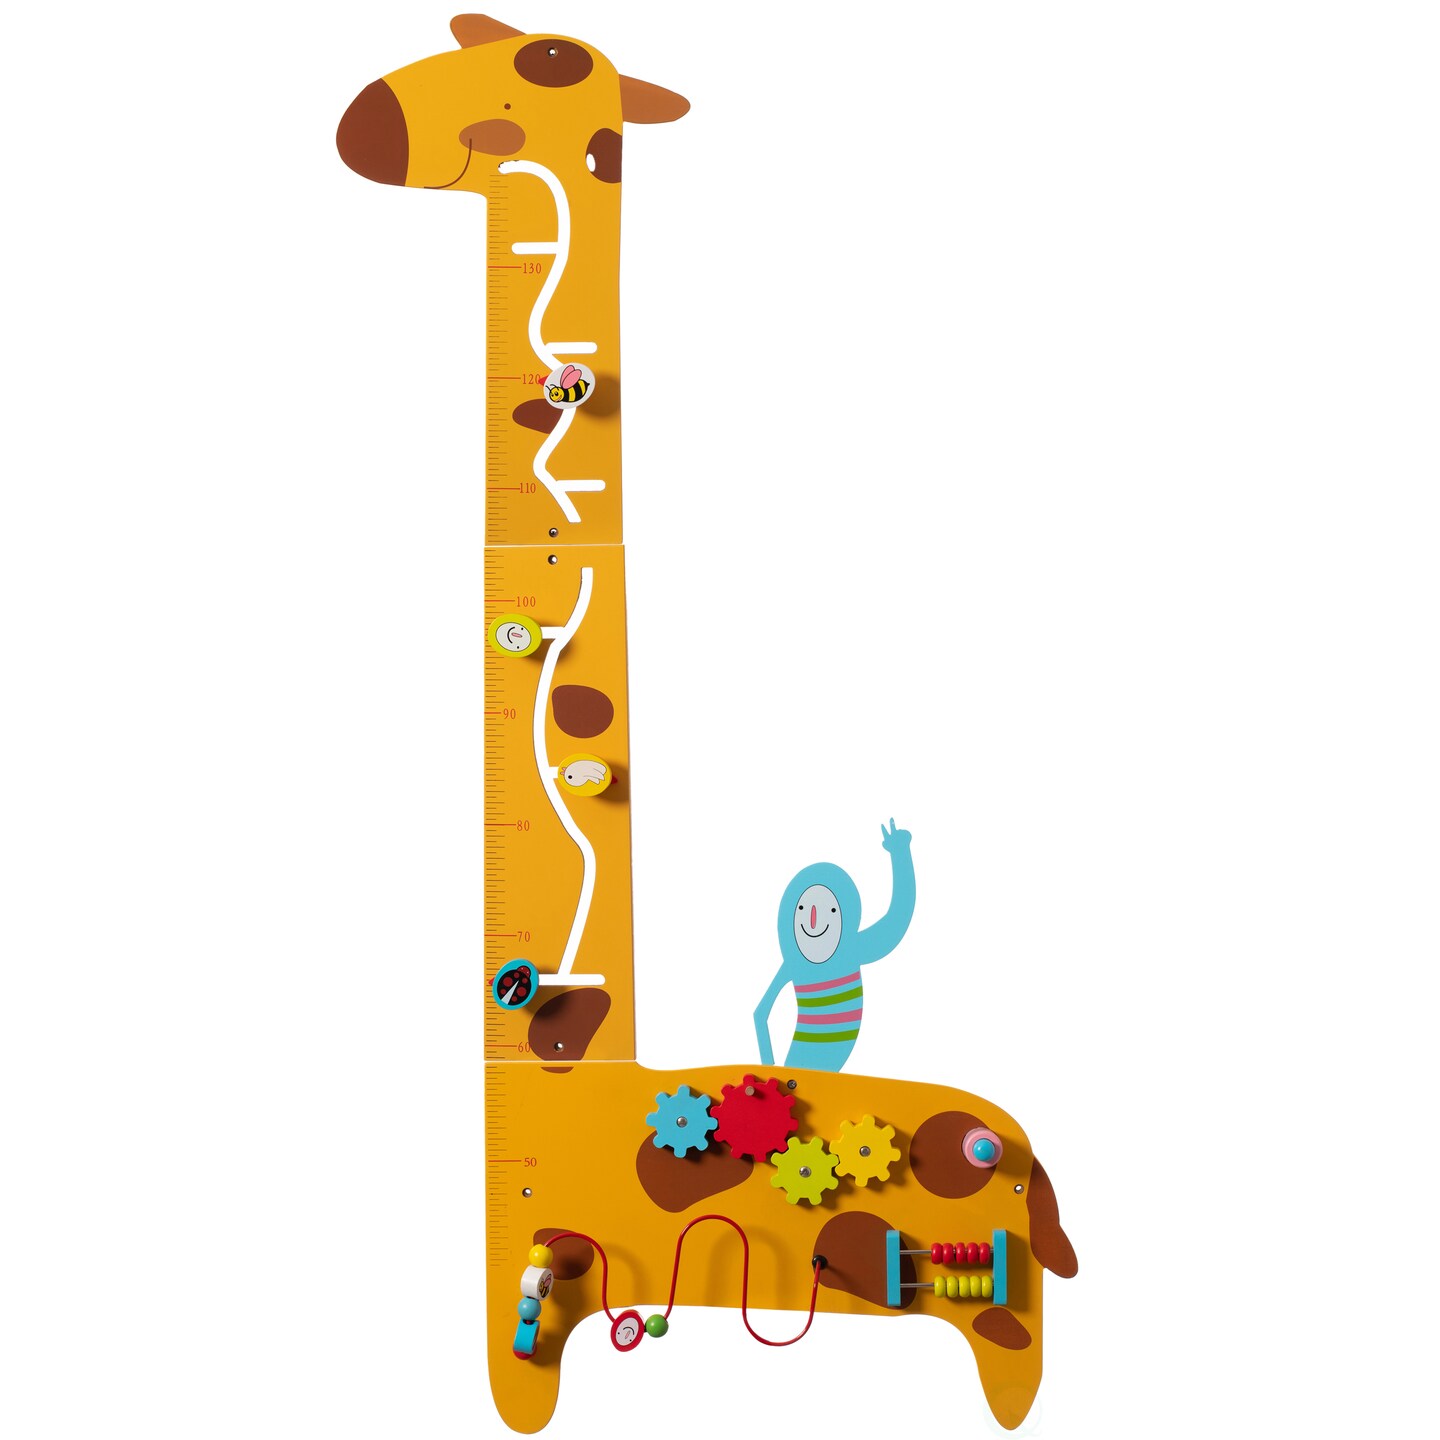 Wooden Giraffe Sensory Wall Game, Activity Toy Growth Chart for Playroom, Nursery, Preschool, and Doctors&#x27; Office